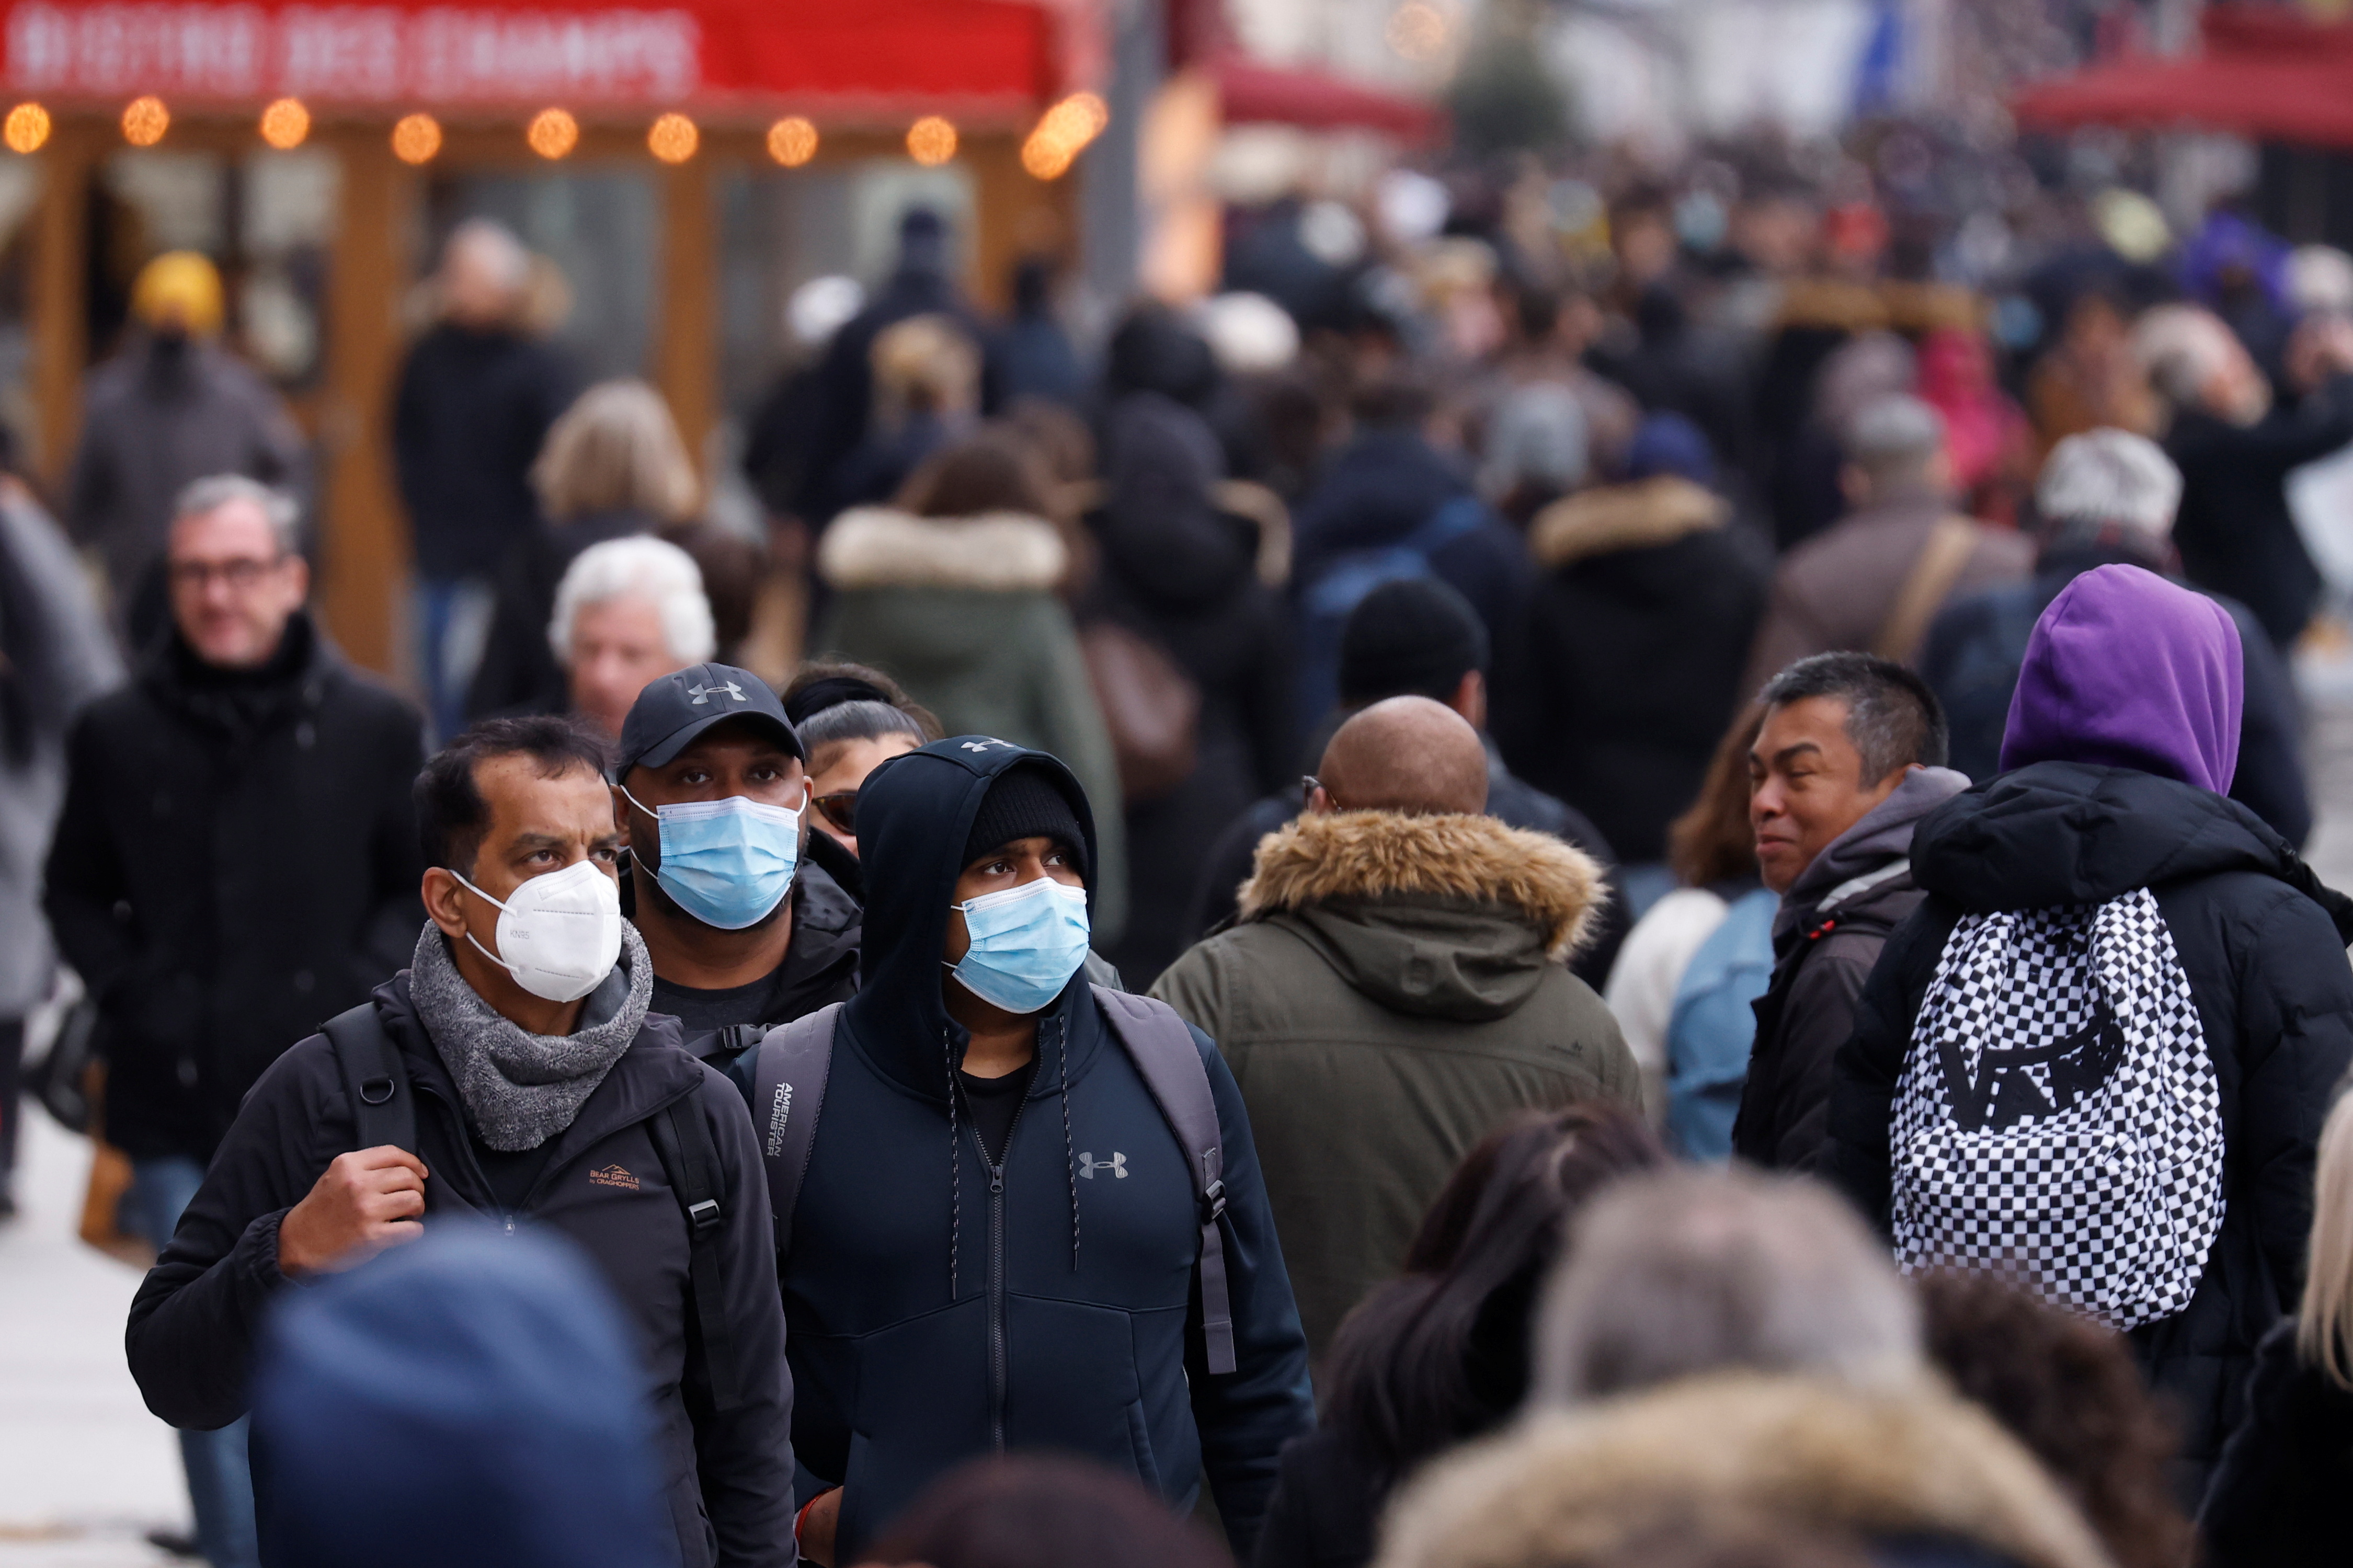 People, wearing protective face masks, walk on the Champs Elysees Avenue in Paris amid the coronavirus disease (COVID-19) outbreak in France, December 6, 2021. REUTERS/Gonzalo Fuentes